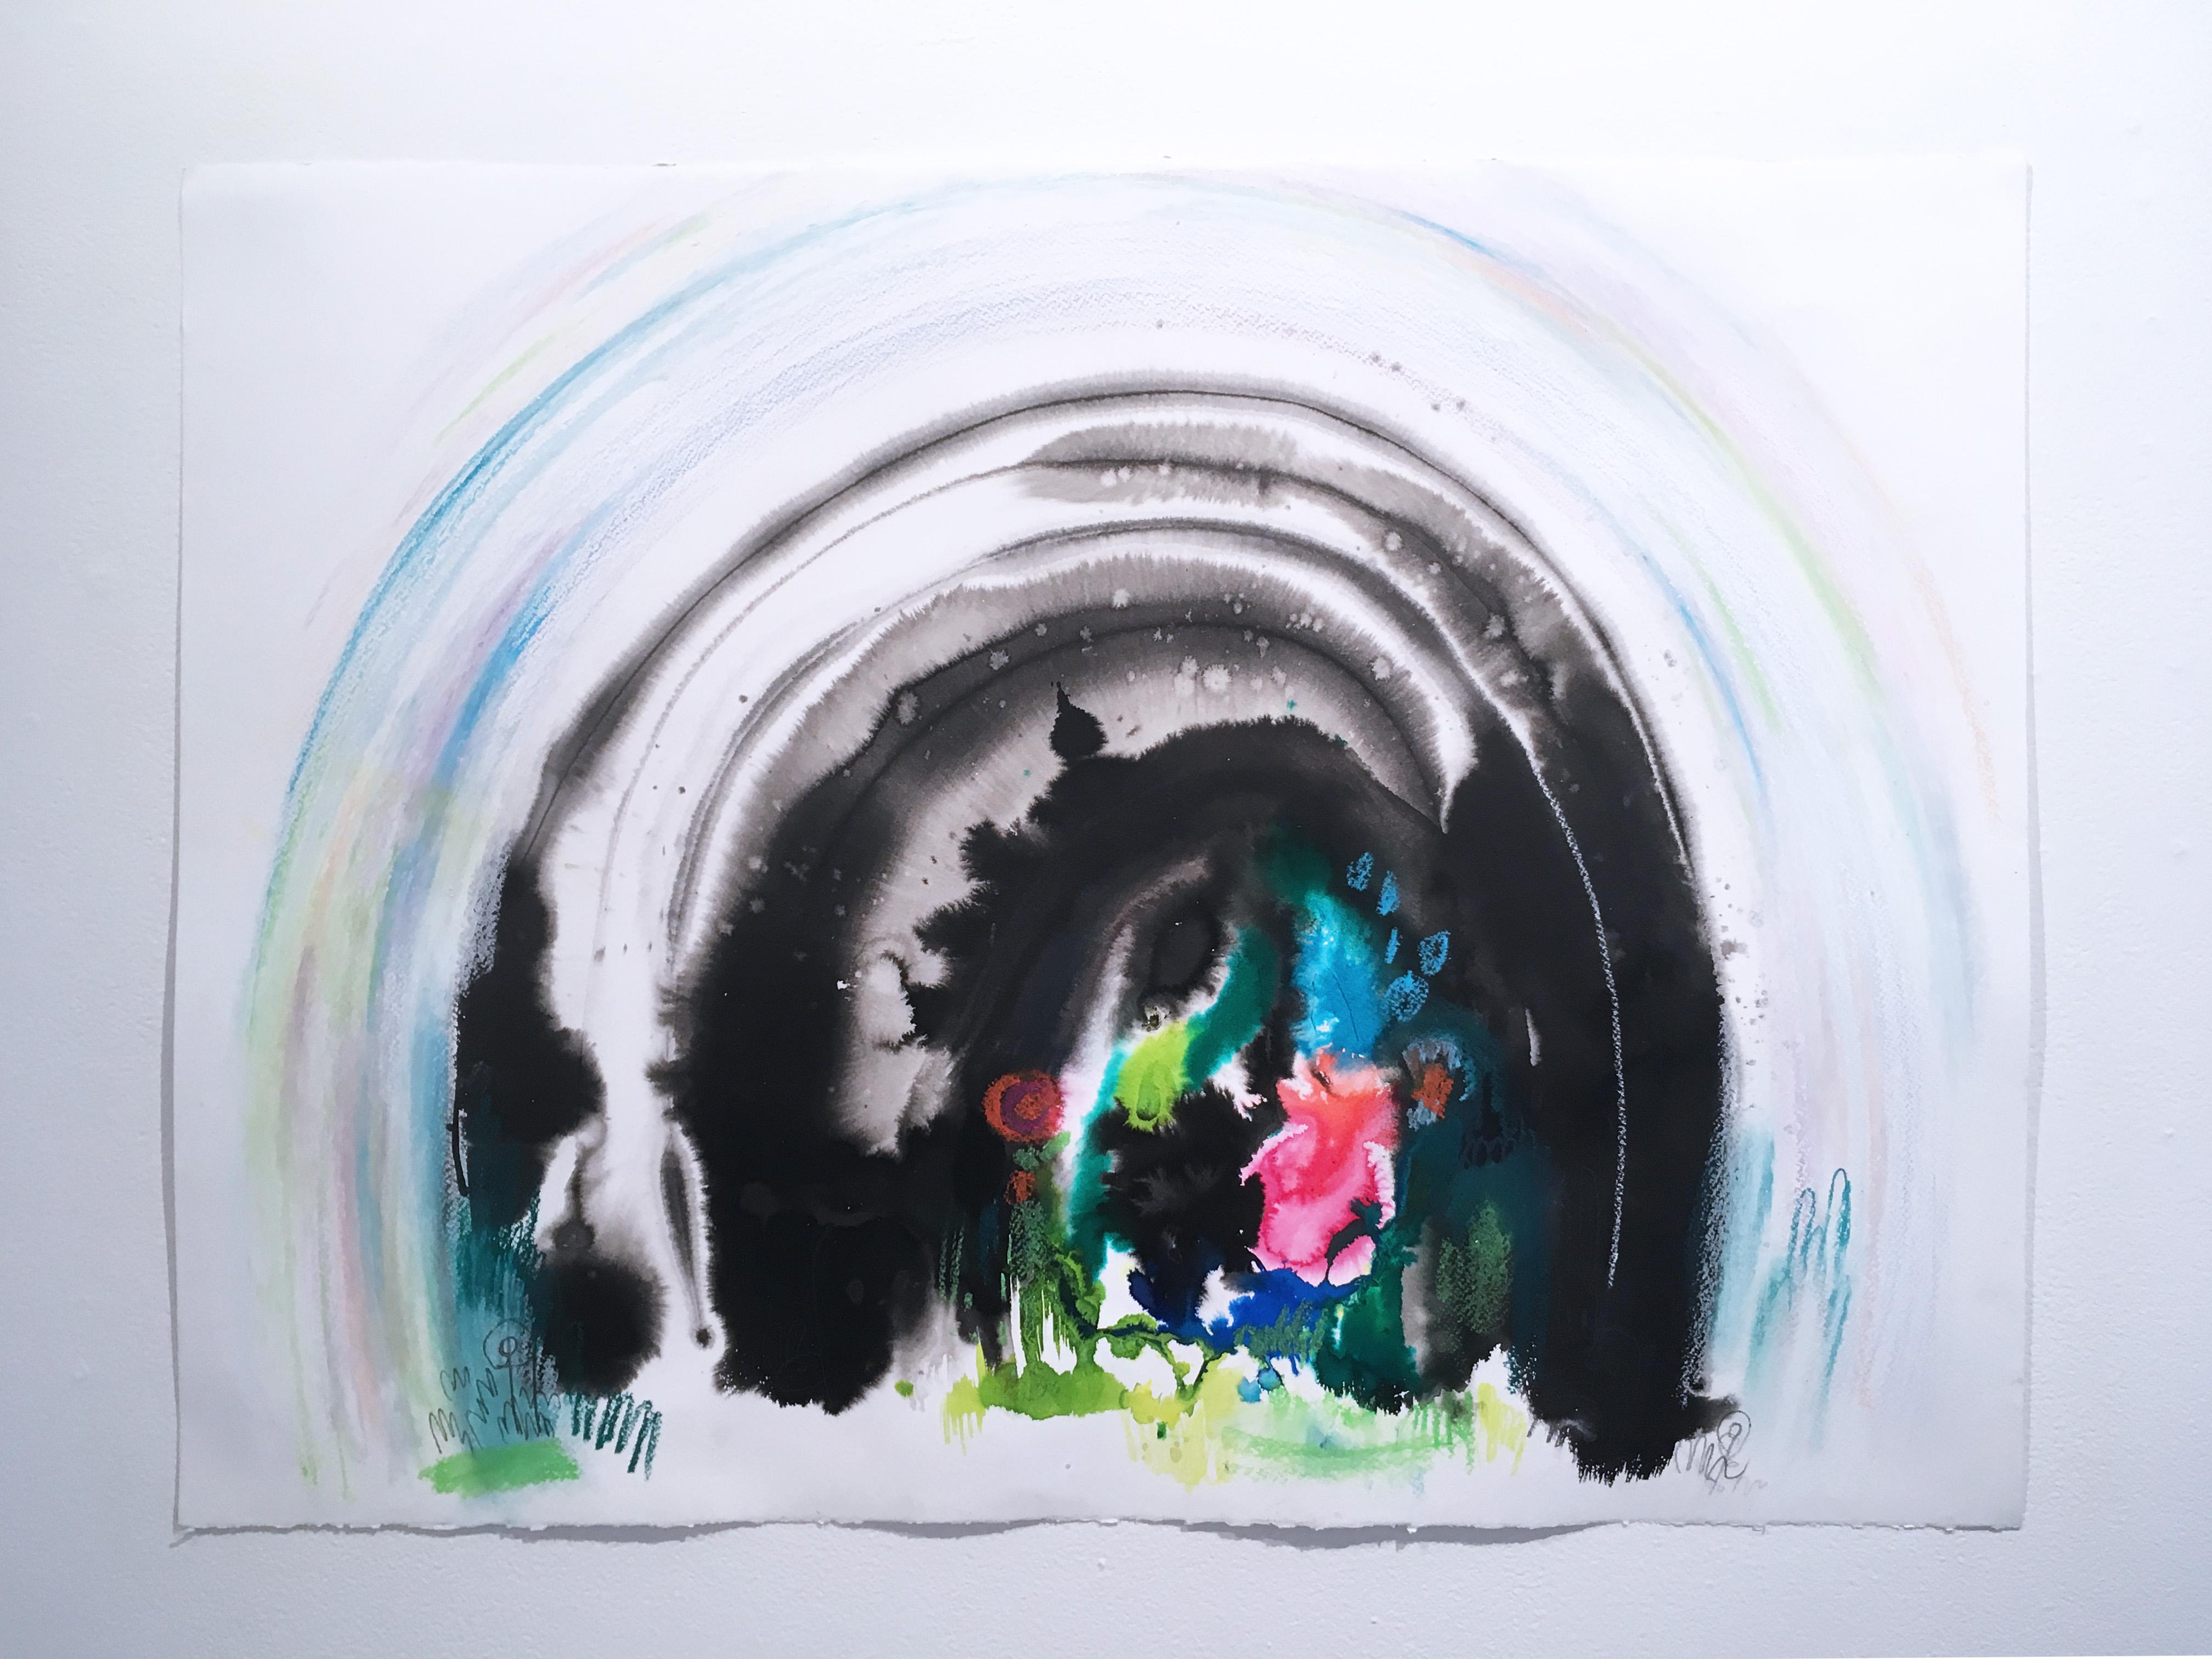 Bijoux Cave, 2020, watercolor, oil pastel, green, landscape, graphite, fantasy - Painting by Shamona Stokes